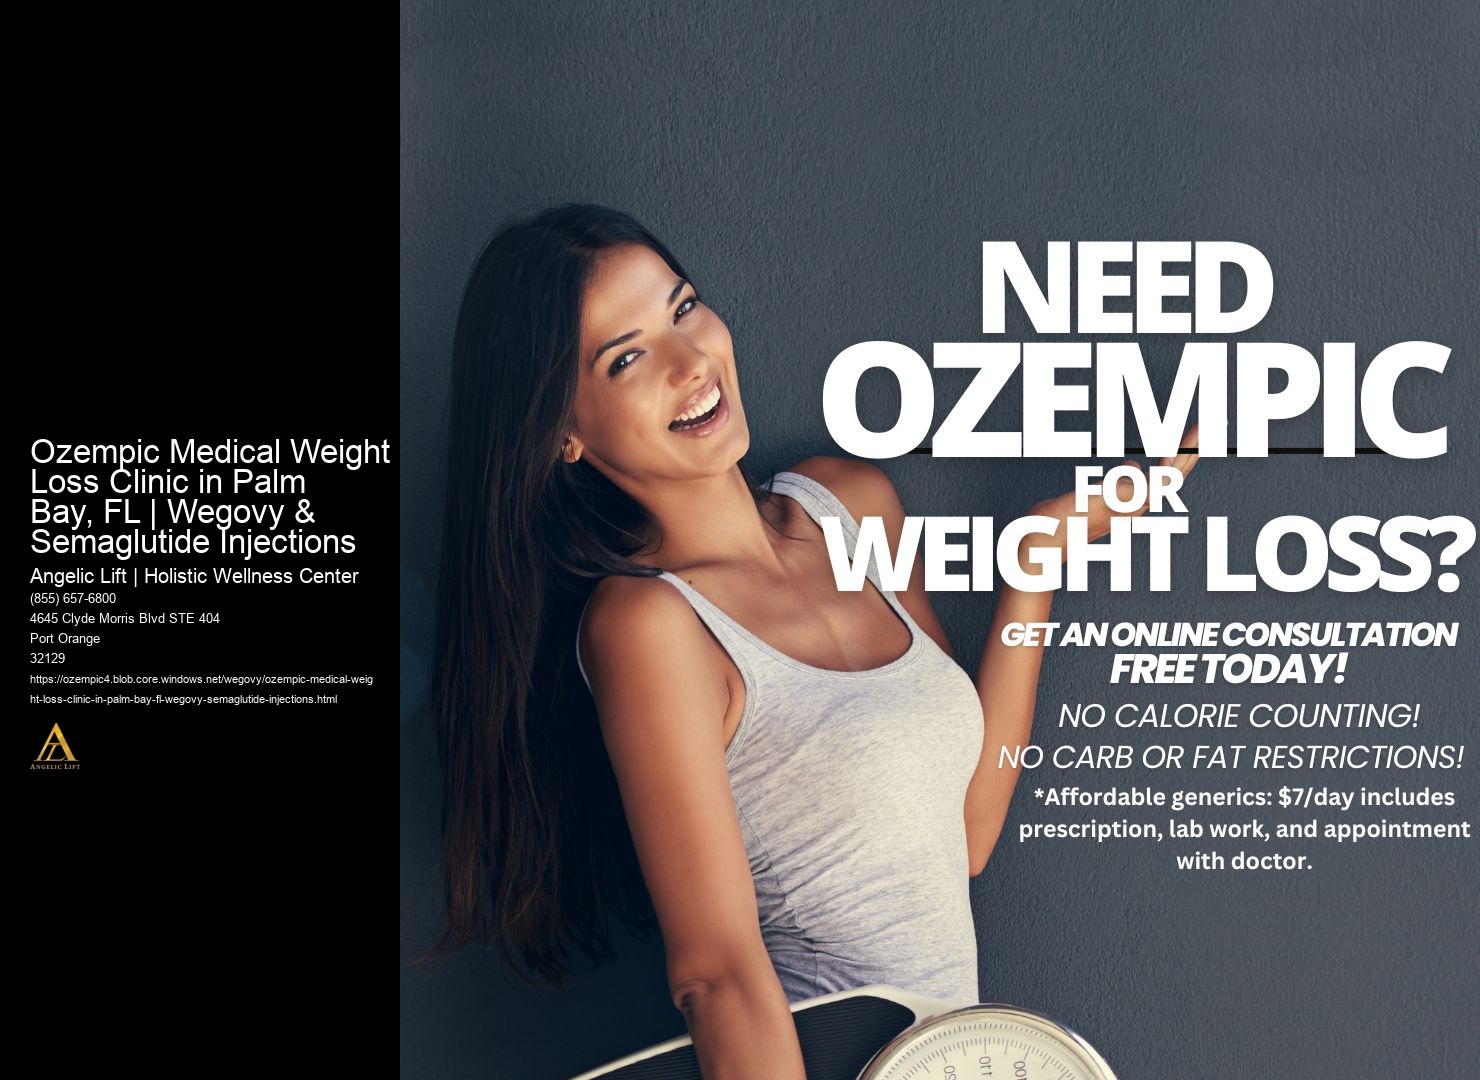 Ozempic Medical Weight Loss Clinic in Palm Bay, FL | Wegovy & Semaglutide Injections